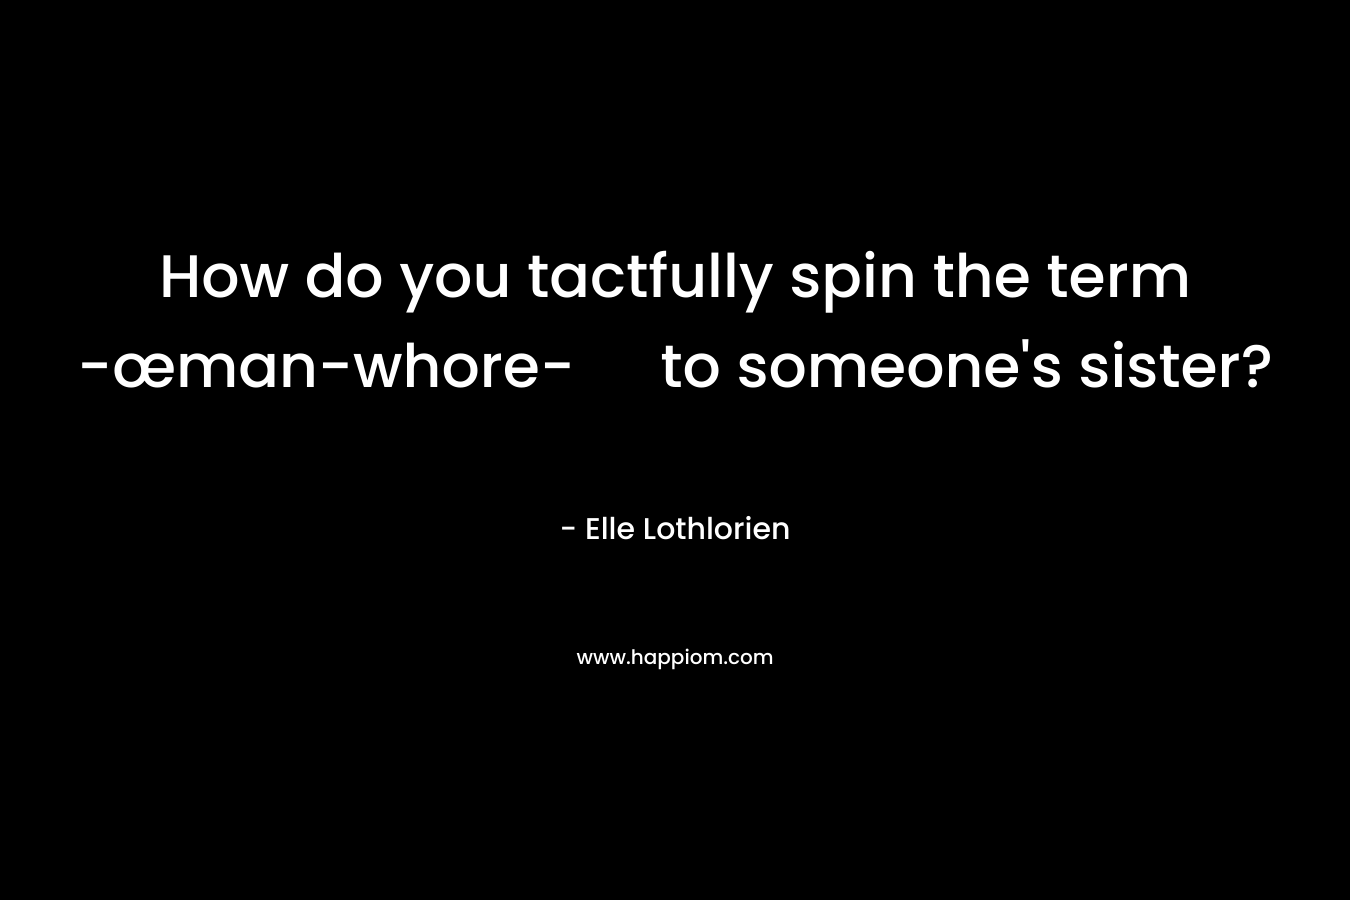 How do you tactfully spin the term -œman-whore- to someone's sister?